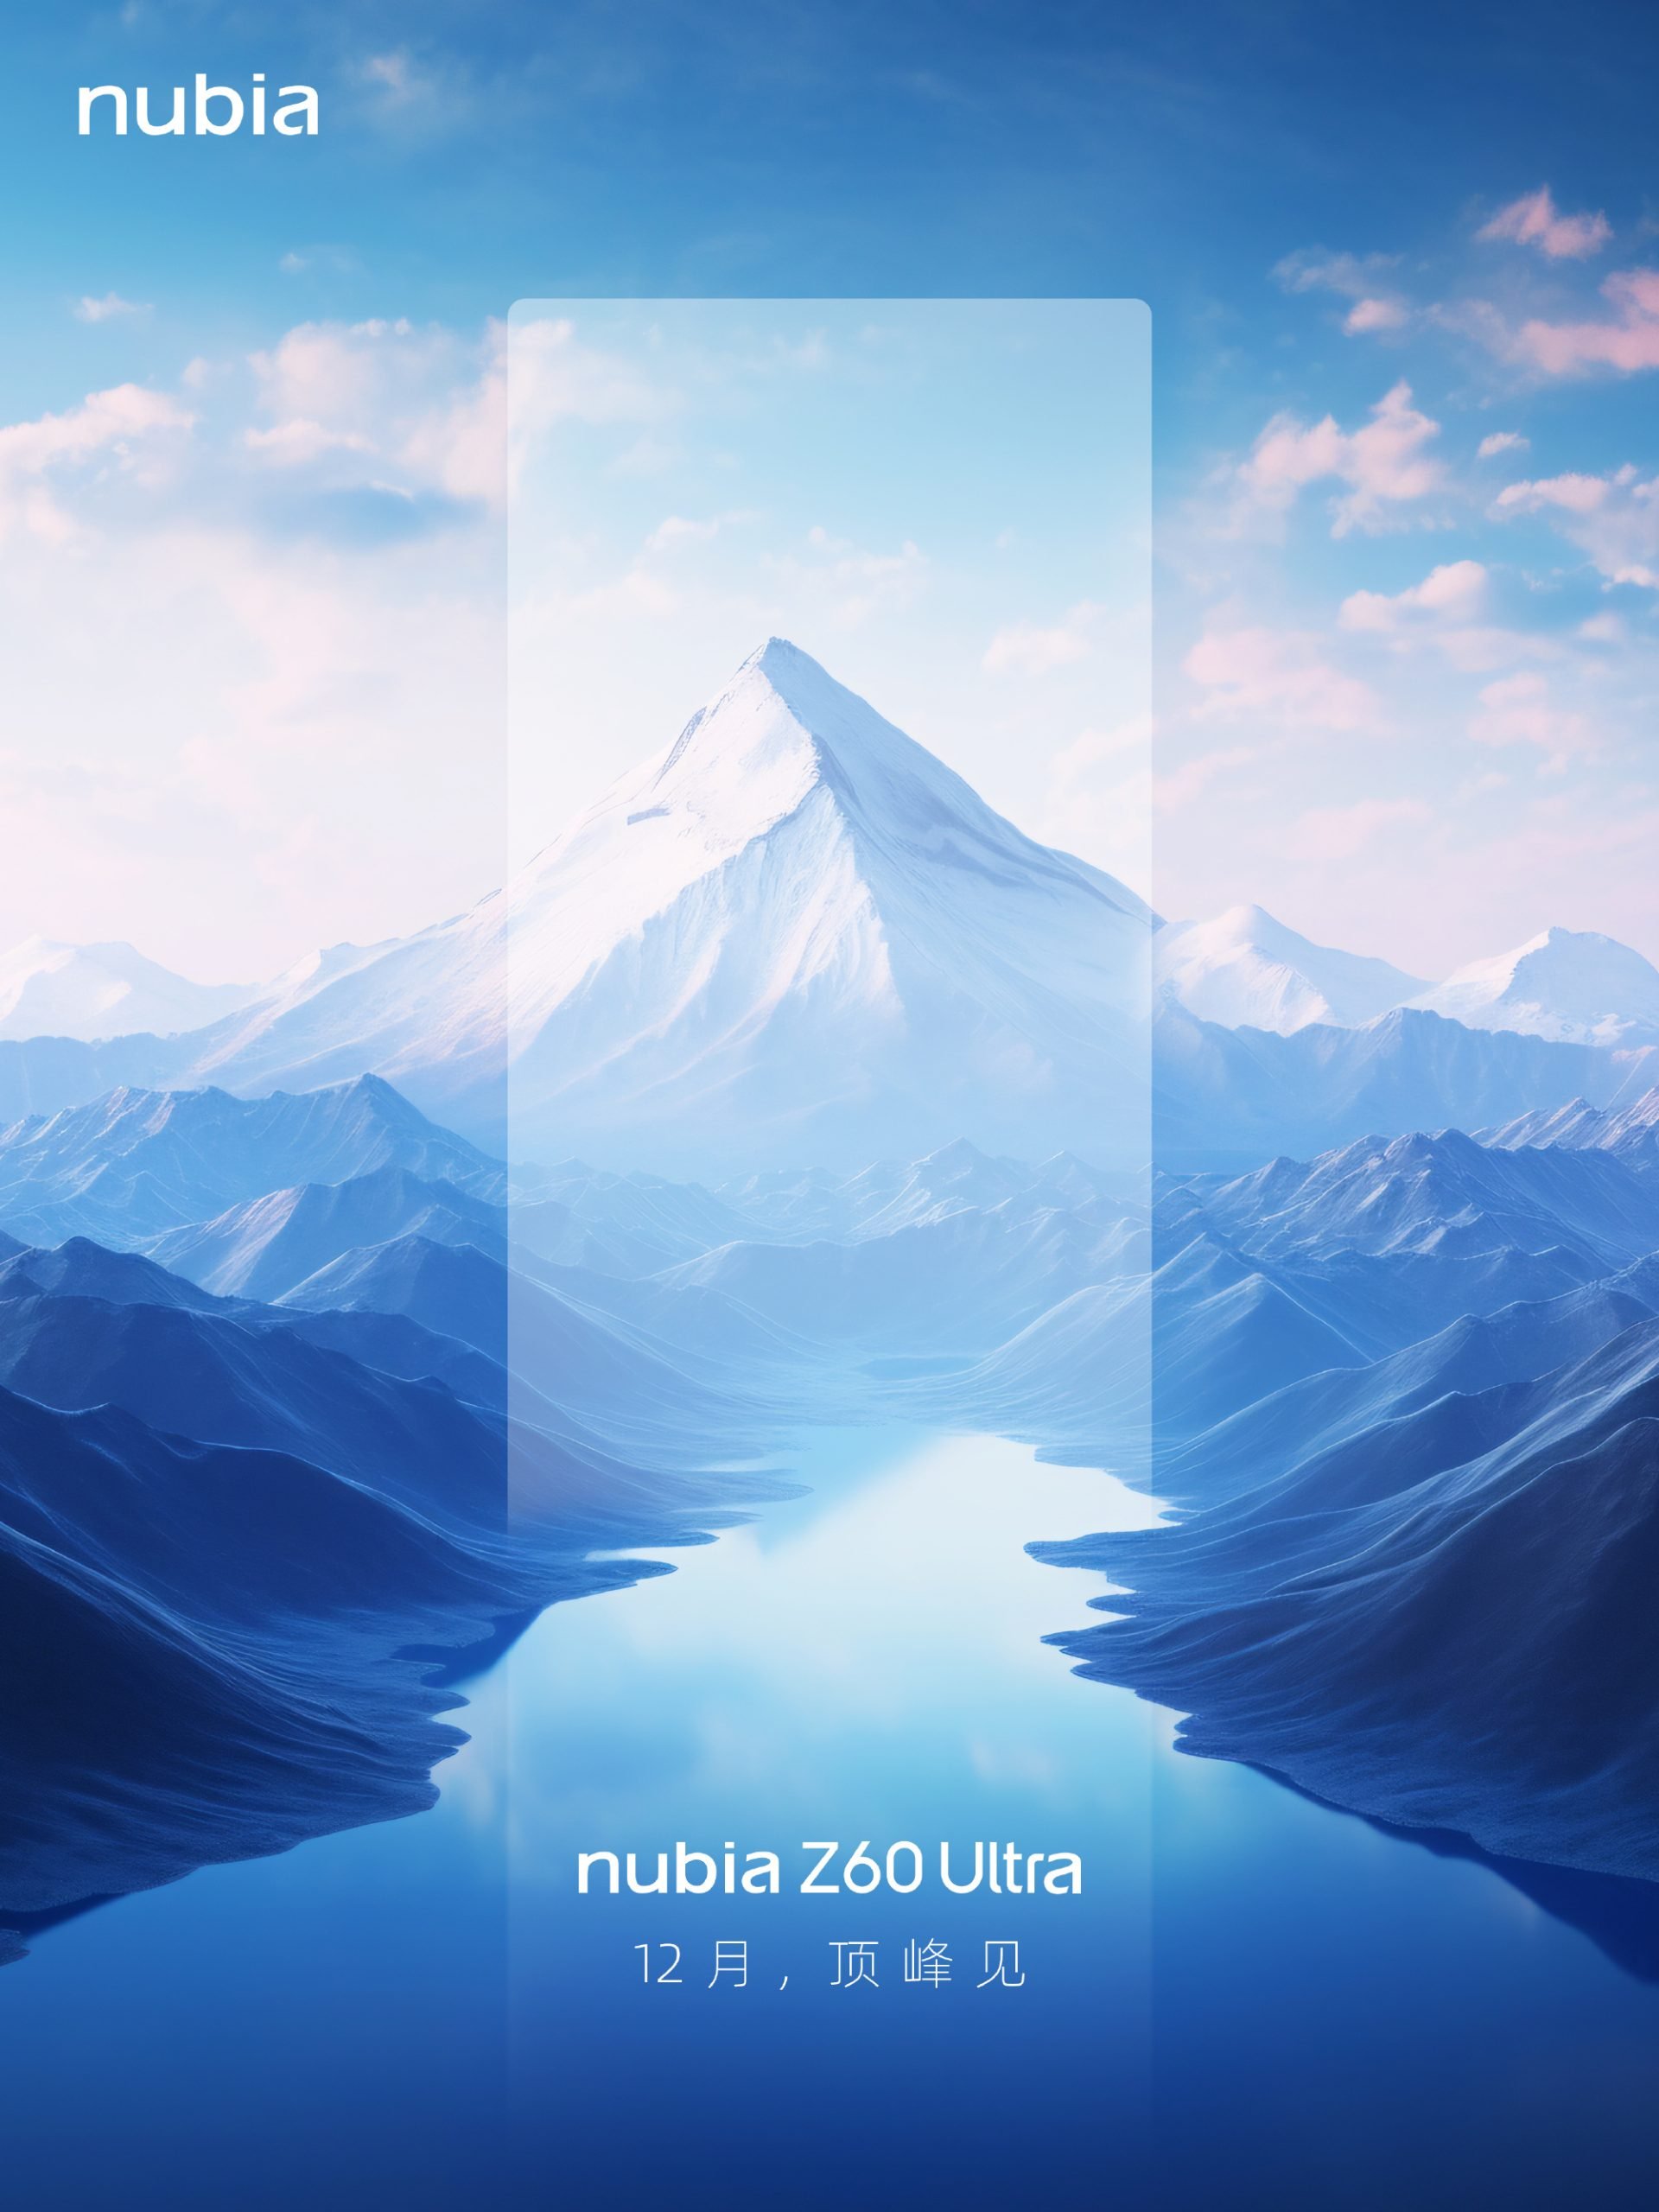 Nubia Z60 Ultra Receives 3C Certification Ahead of December 19 Launch